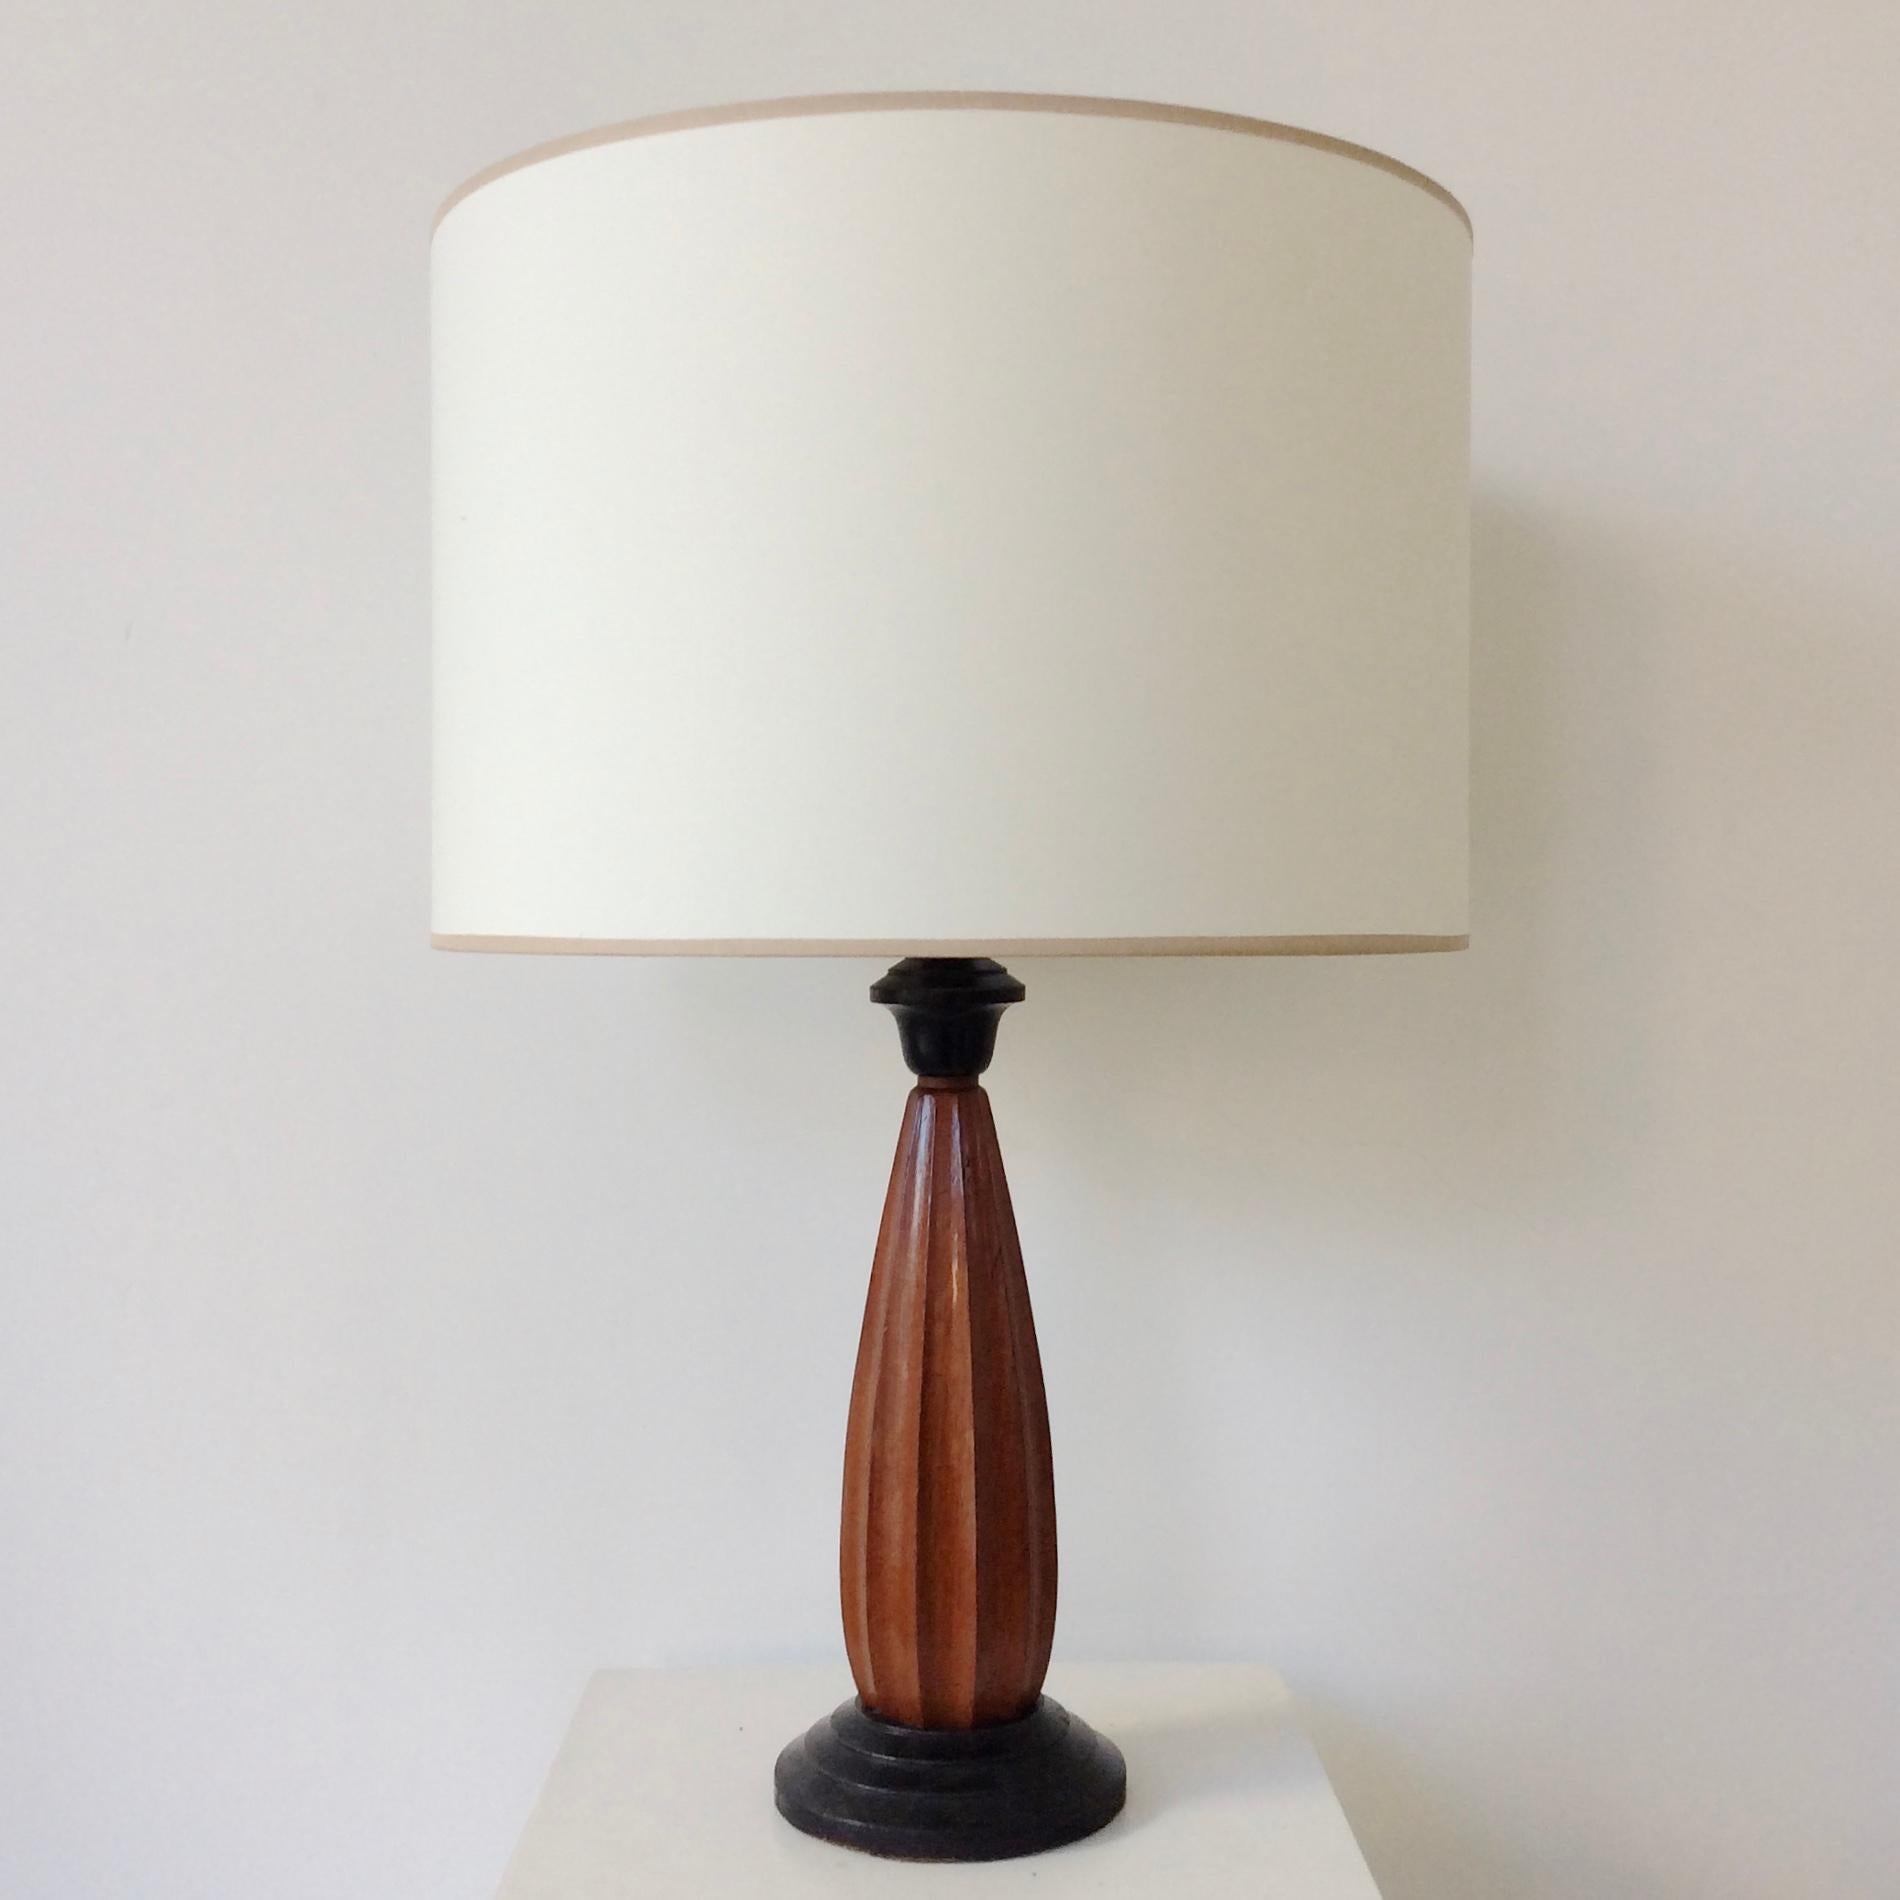 Art Deco table lamp, circa 1930, France.
Polished fluted wood, black tinted wood, new ivory fabric shade.
One E27 bulb of 60 W.
Dimensions: 57 cm total height, diameter 38 cm.
All purchases are covered by our Buyer Protection Guarantee.
This item